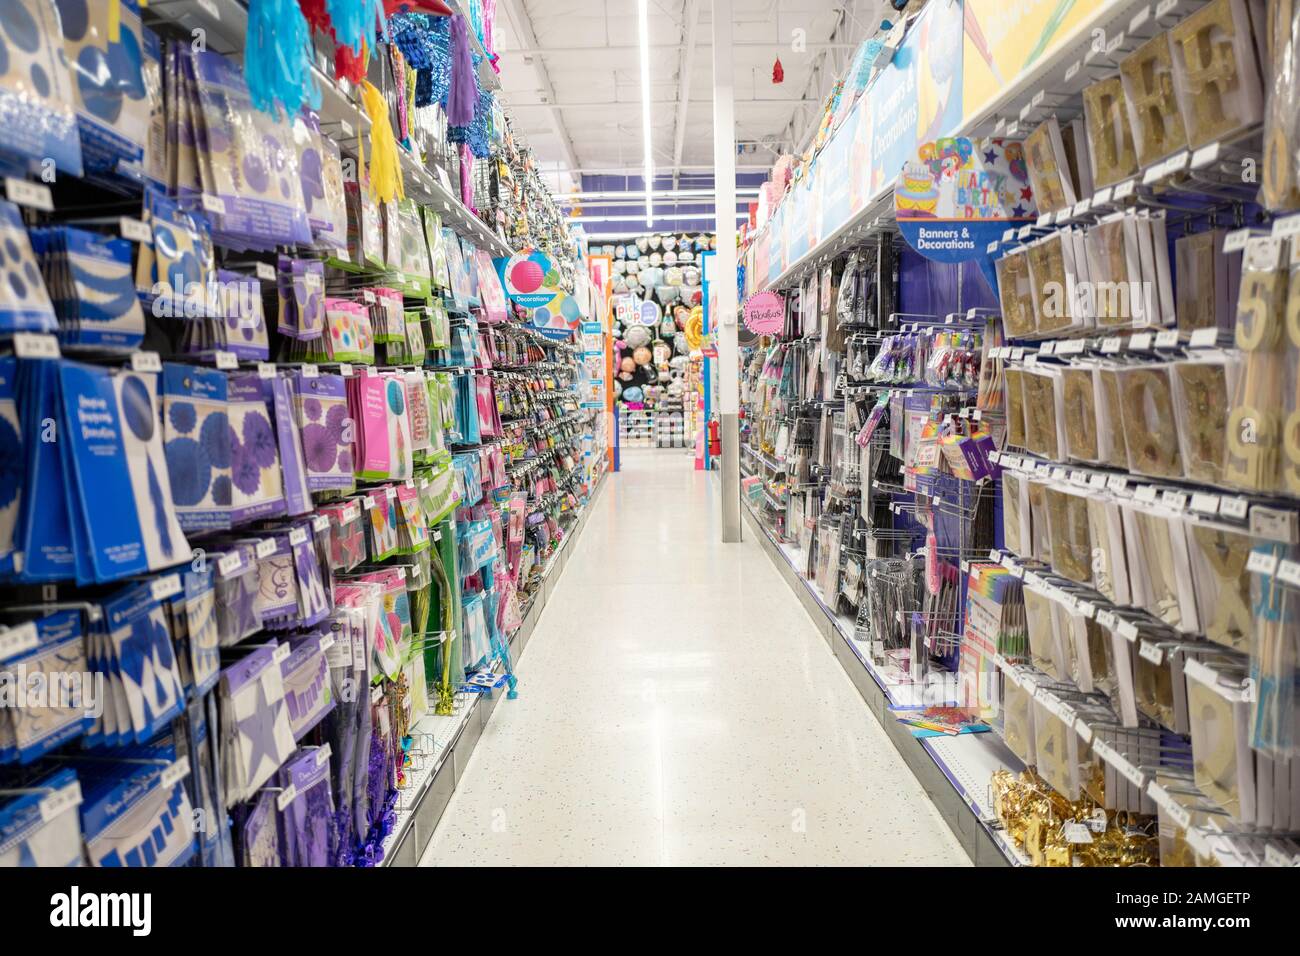 View down aisles of a Party City party store in Pleasanton, California, stacked with a large variety of merchandise, November 23, 2019. Many stores expect increased traffic during the busy Black Friday shopping period. () Stock Photo